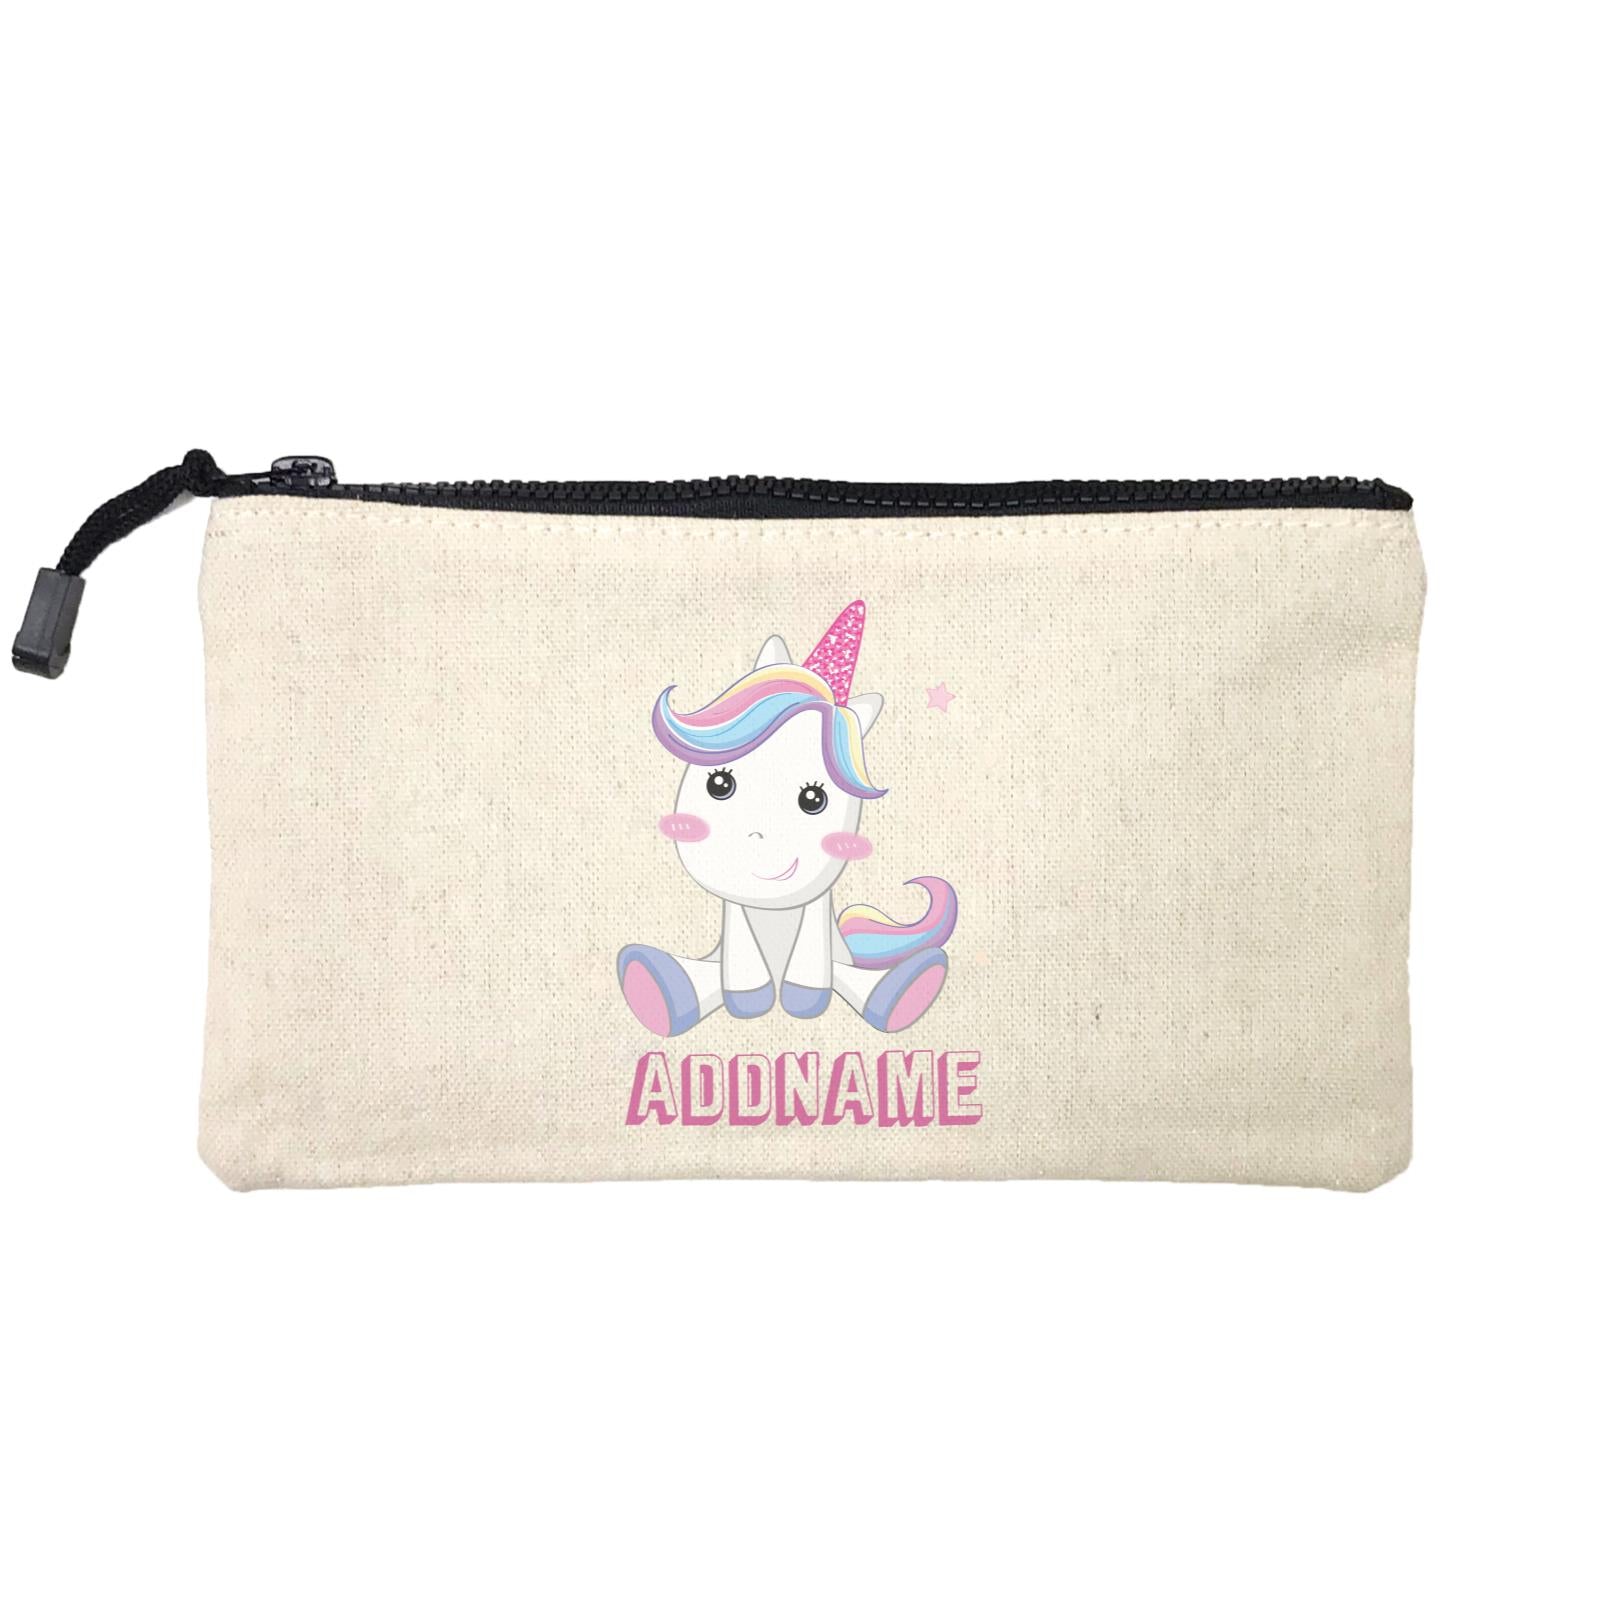 Birthday Unicorn Cute Looking Addname Mini Accessories Stationery Pouch